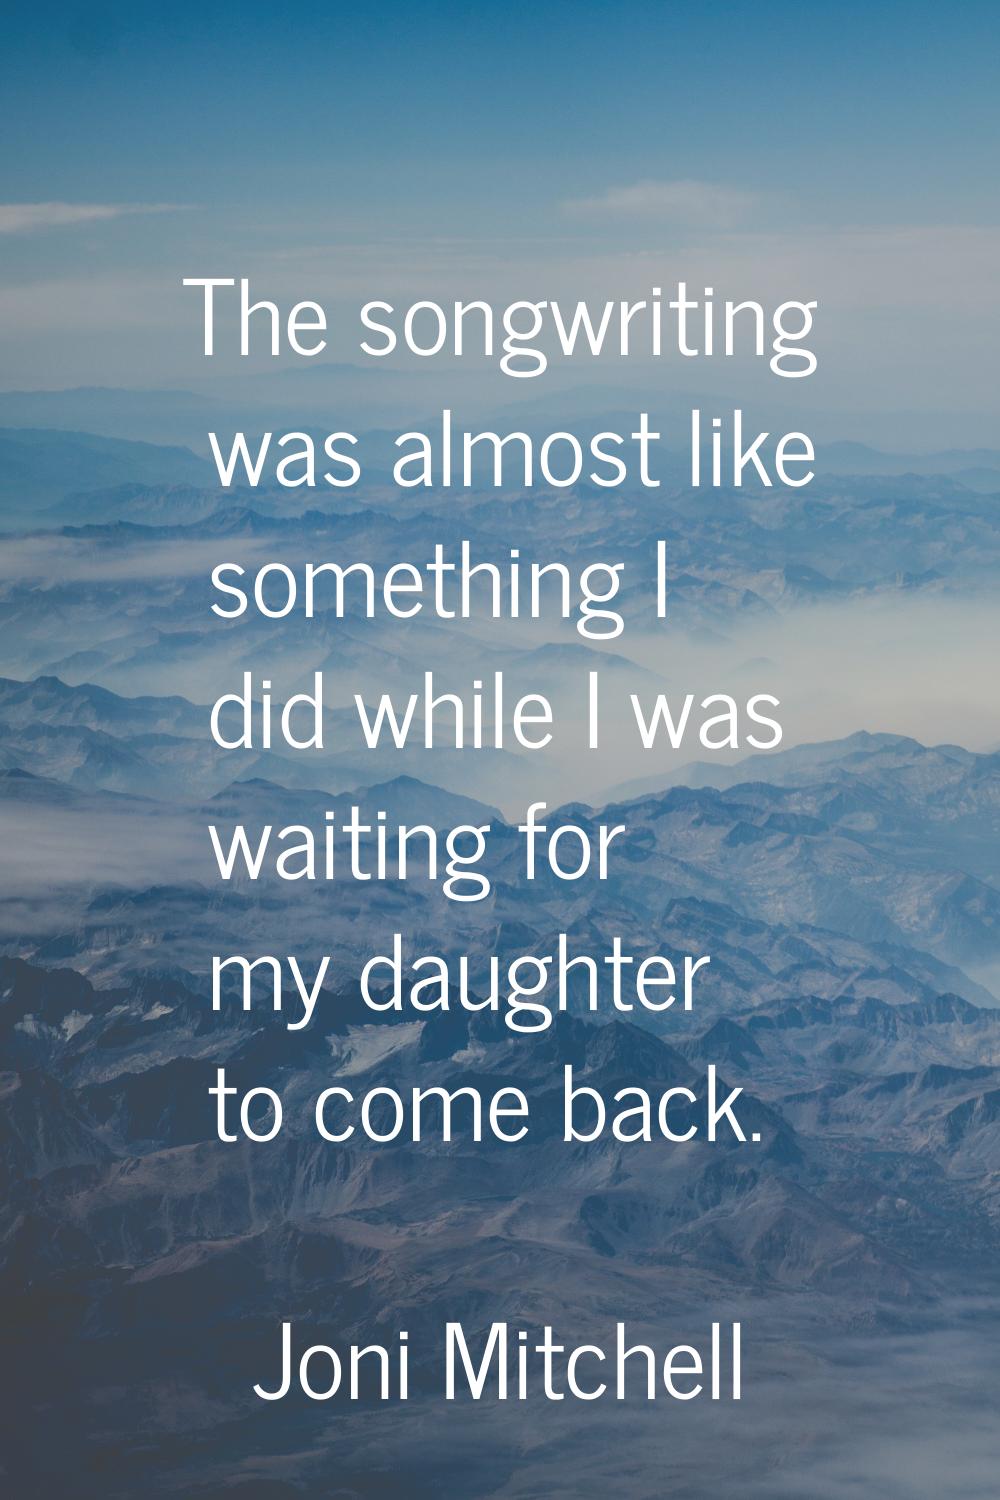 The songwriting was almost like something I did while I was waiting for my daughter to come back.